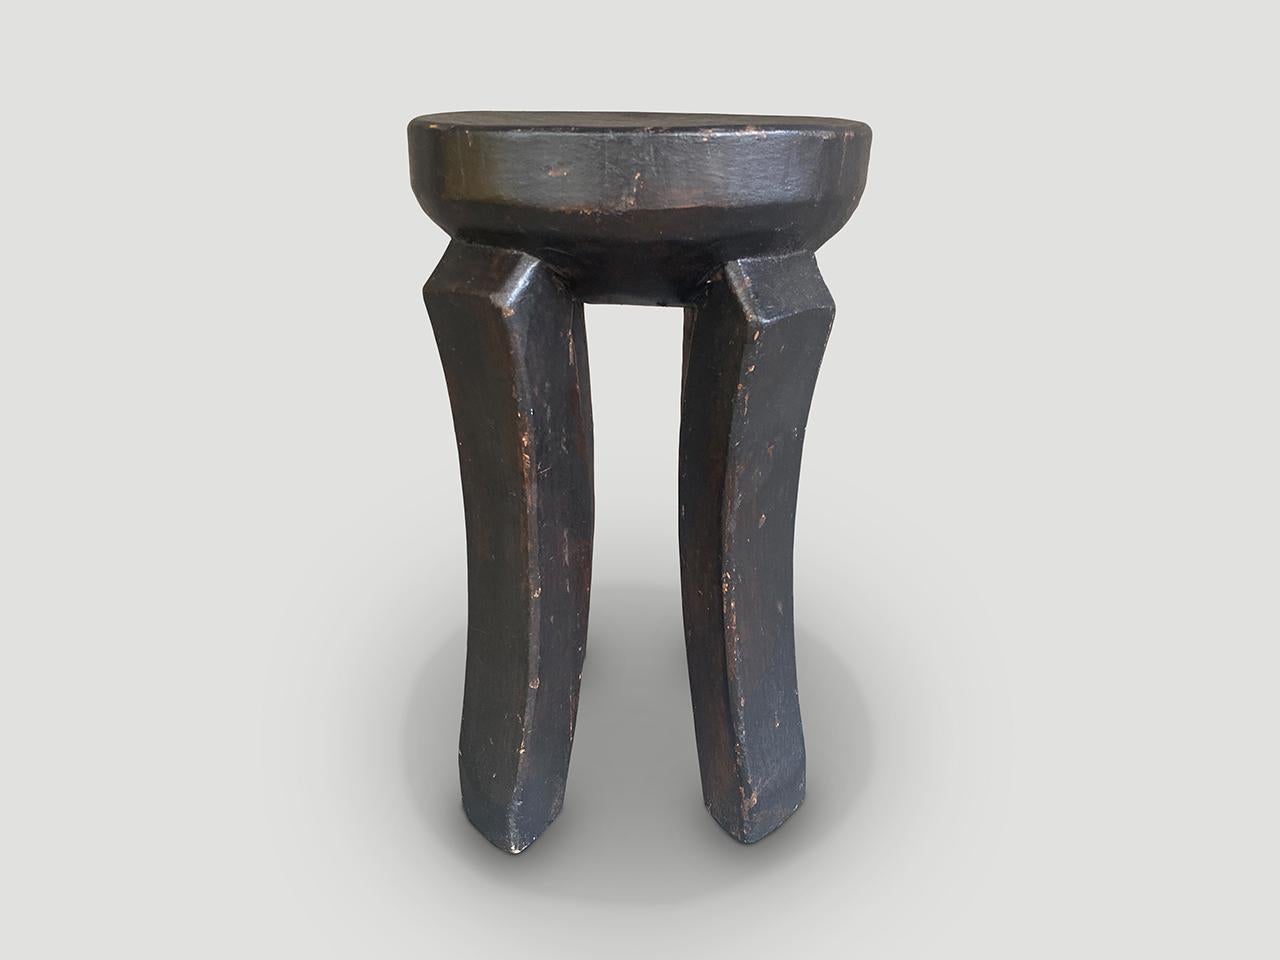 Antique African side table or stool hand carved from a single block of mahogany wood. The top is a thick bevel with beautiful hand carved legs. We only source the best. We have a pair. The price and images reflect the one shown.

This side table